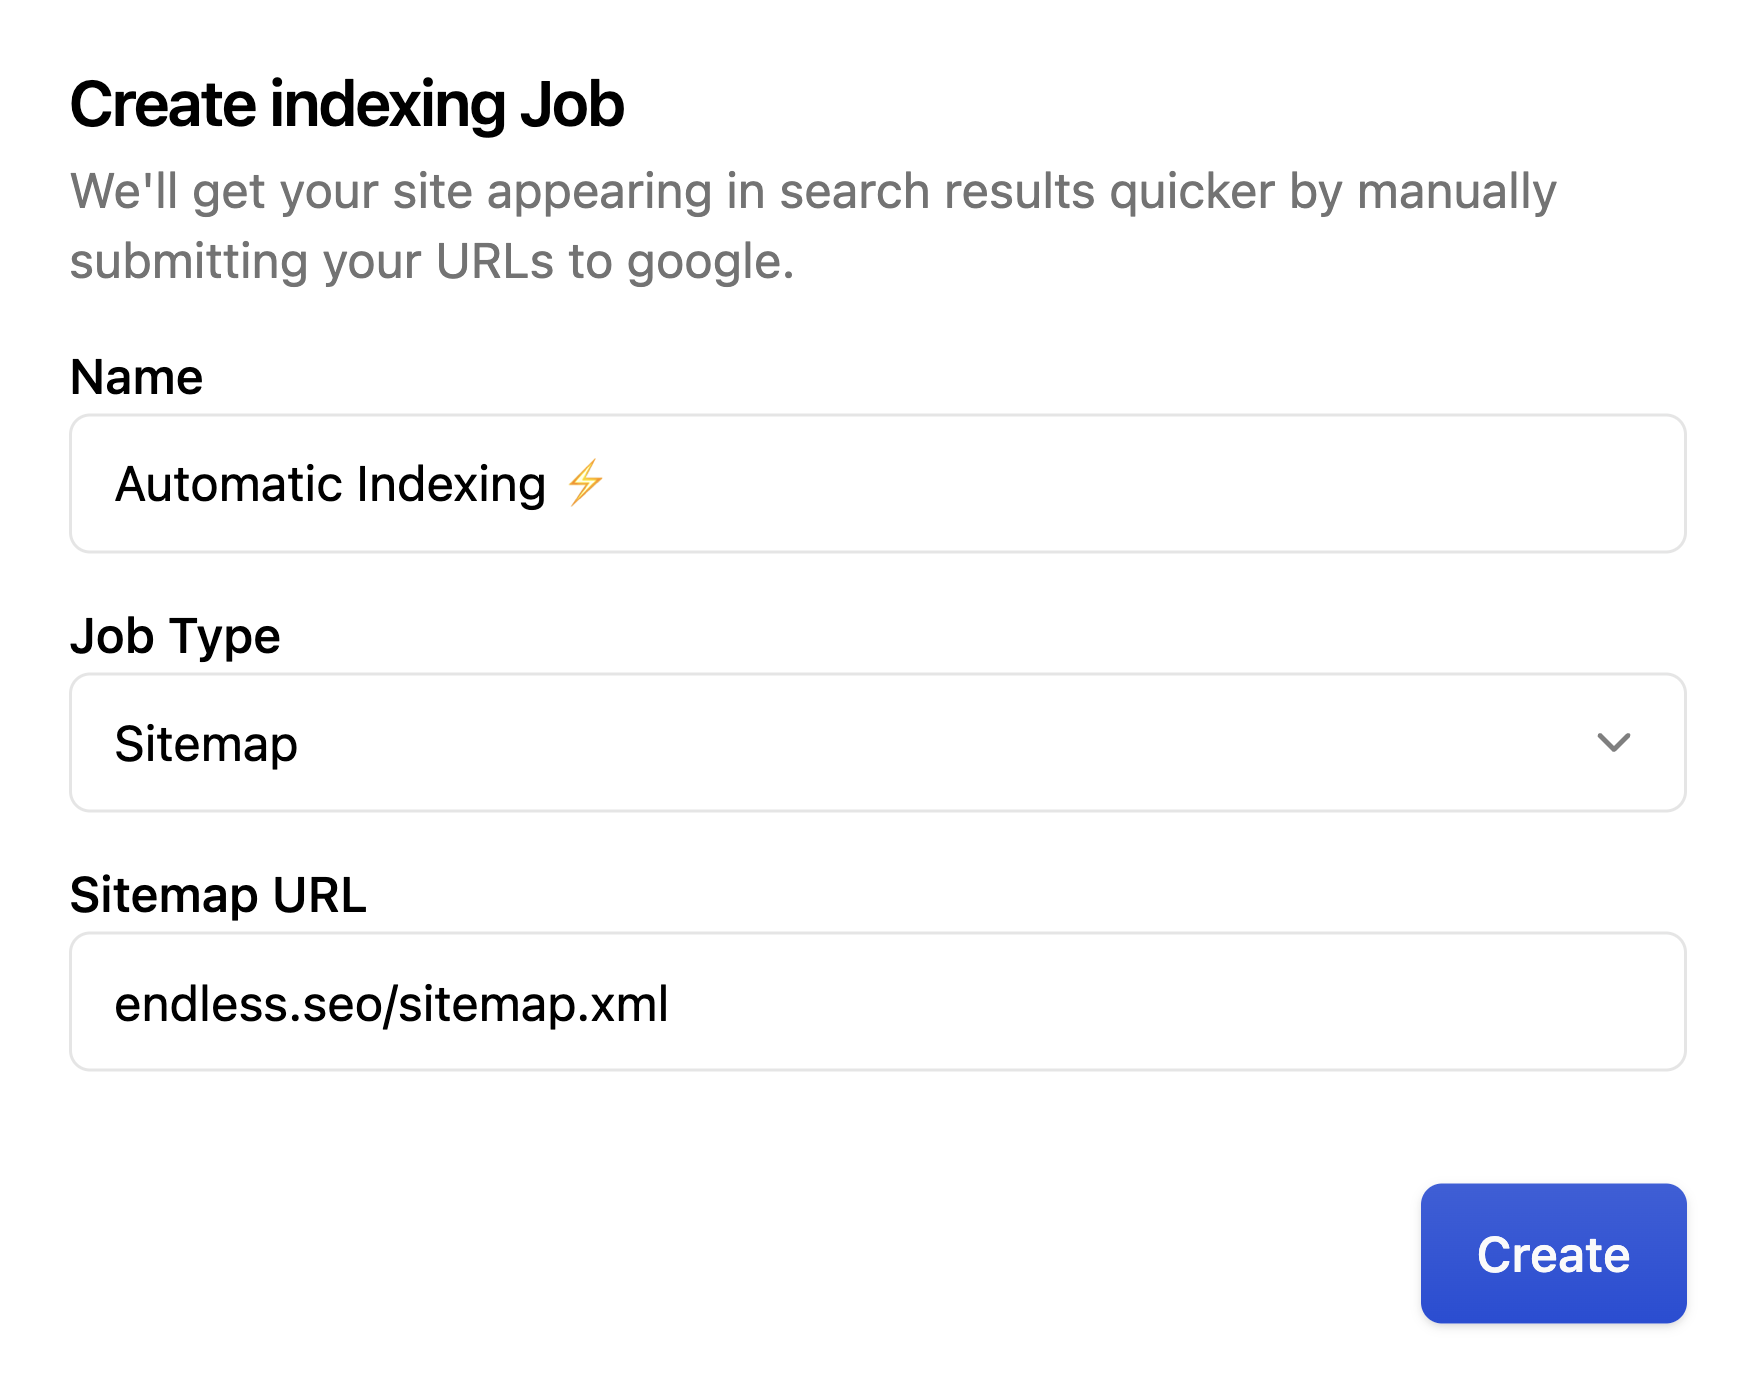 A modal prompting the user to create an indexing job